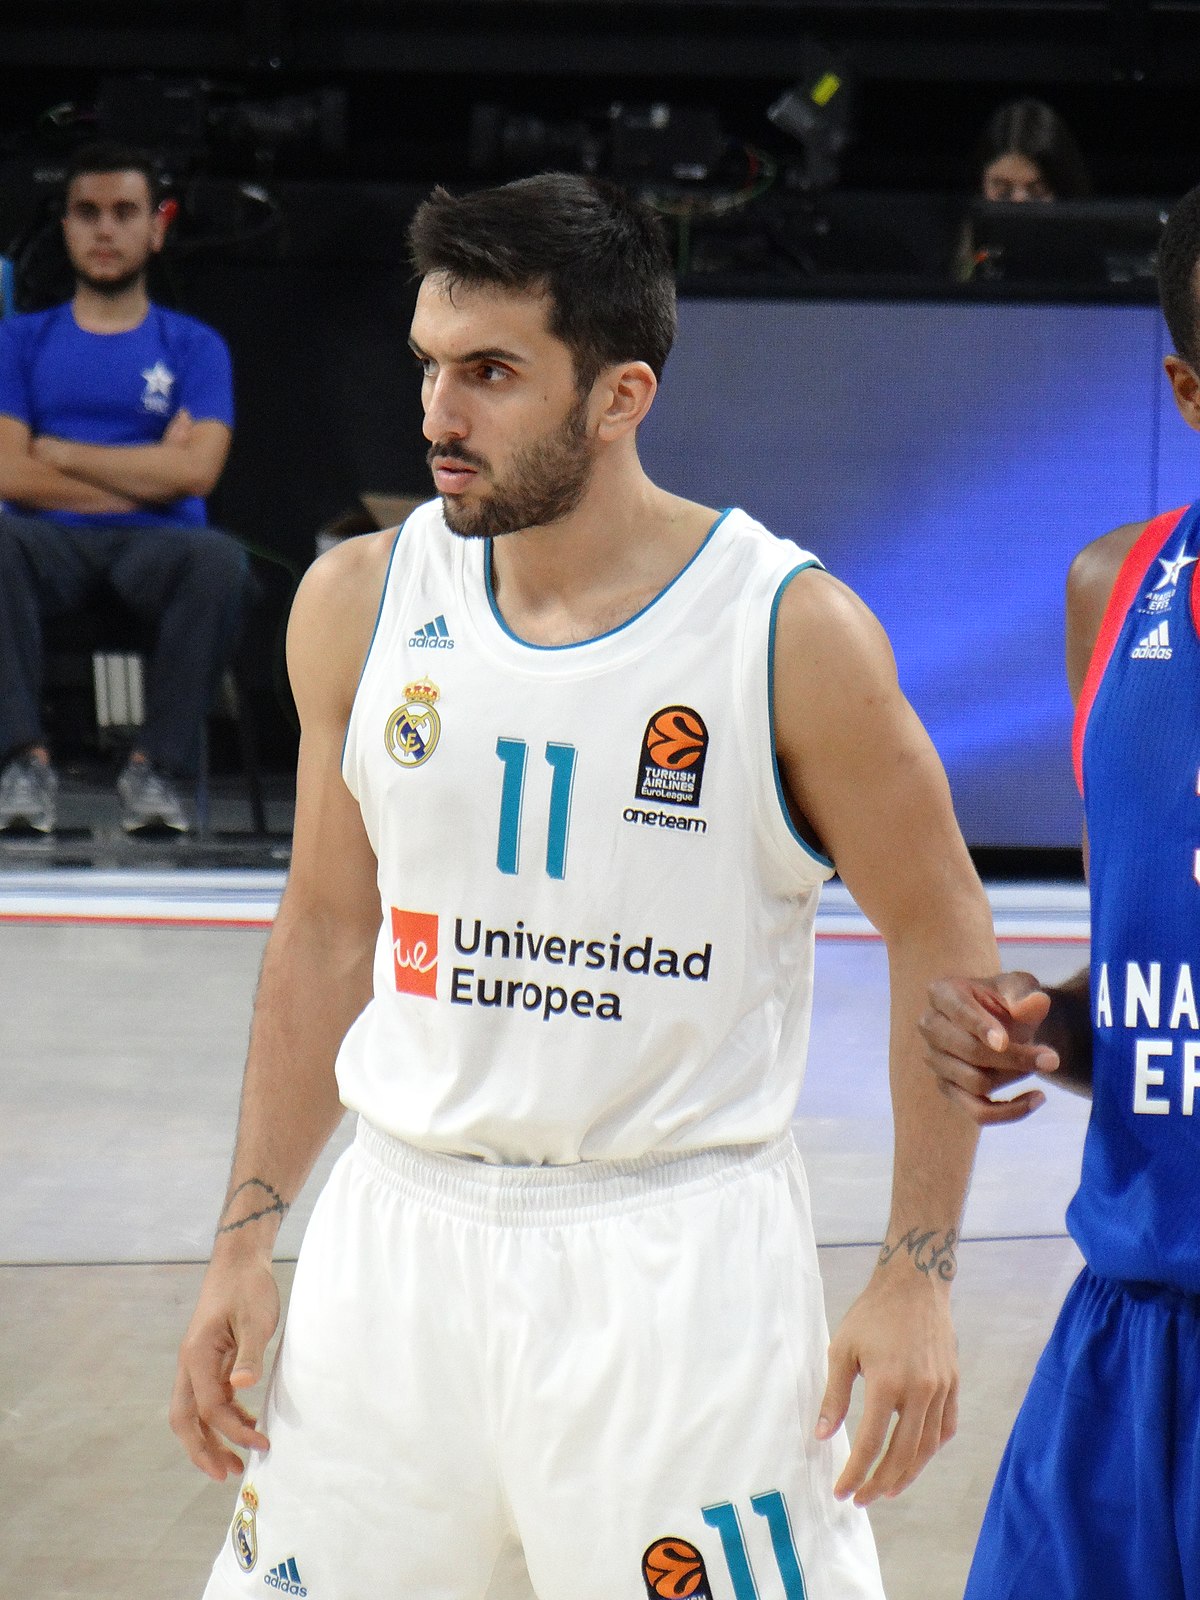 Facundo Campazzo paces Real Madrid past Unicaja in Spanish Cup